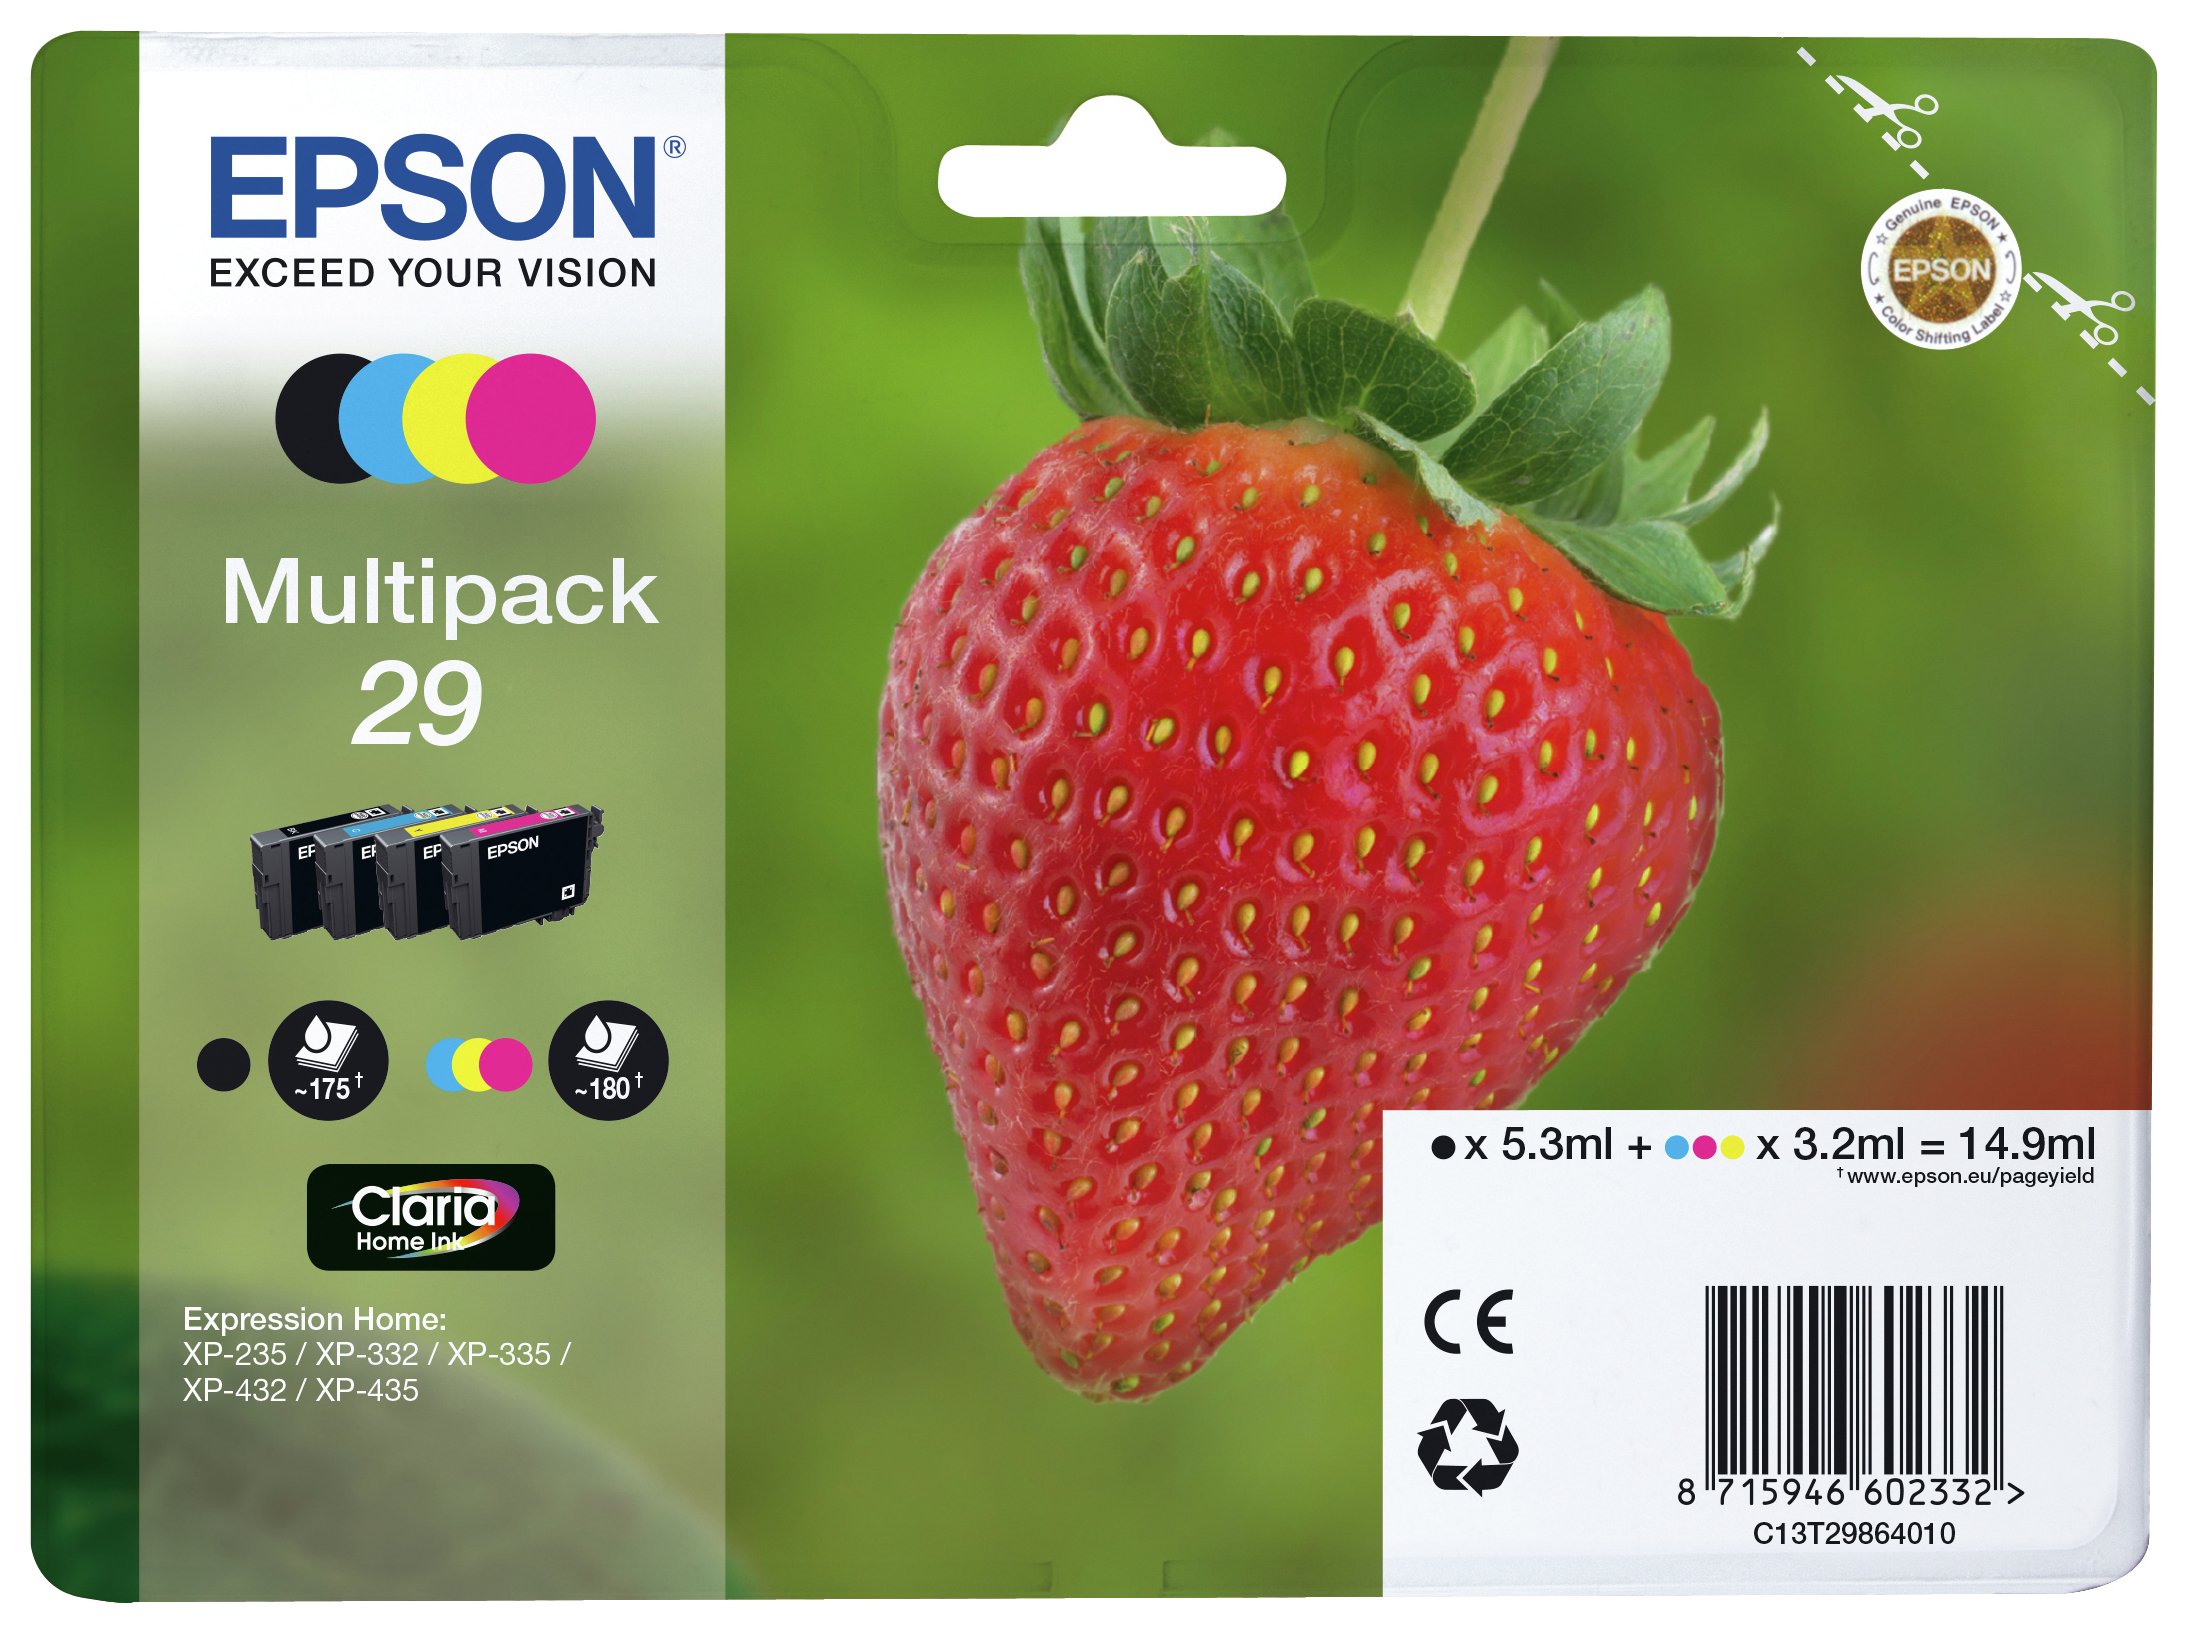 Epson Strawberry 29 Ink Cartridges Multipack review